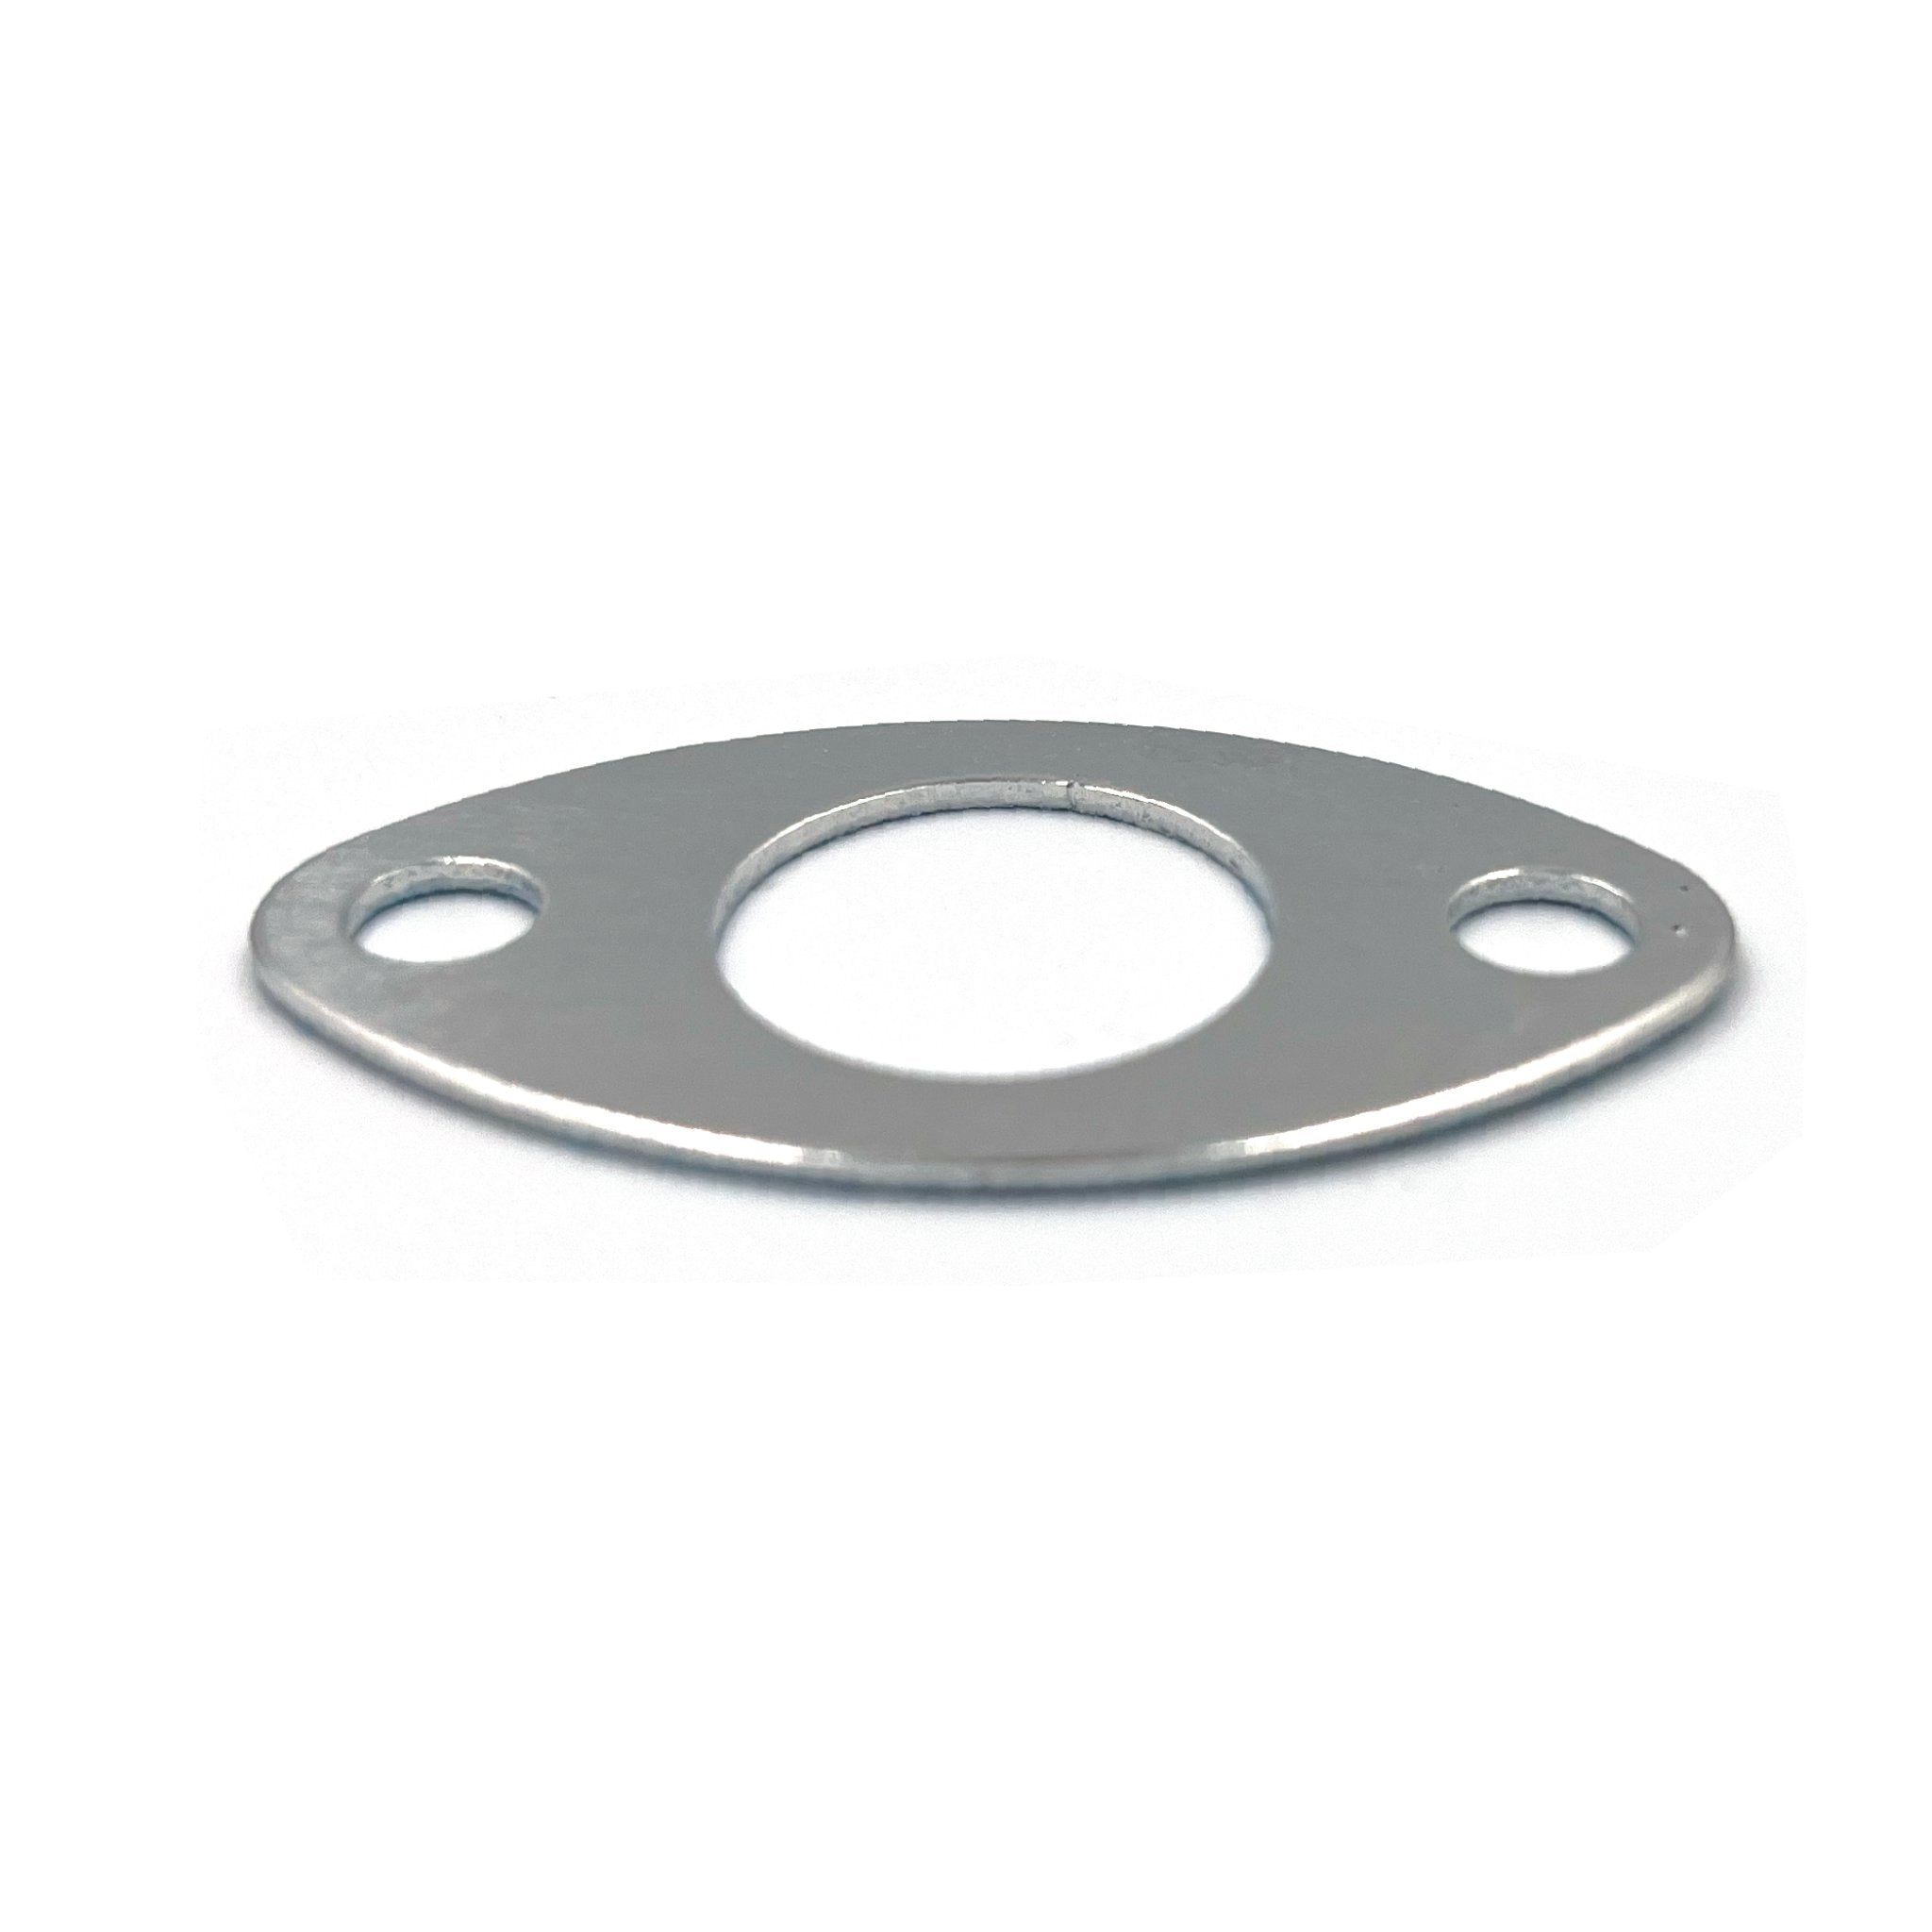 Autoloc Polished Billet Oval Door Popper Plate Adds Reinforcement and Style